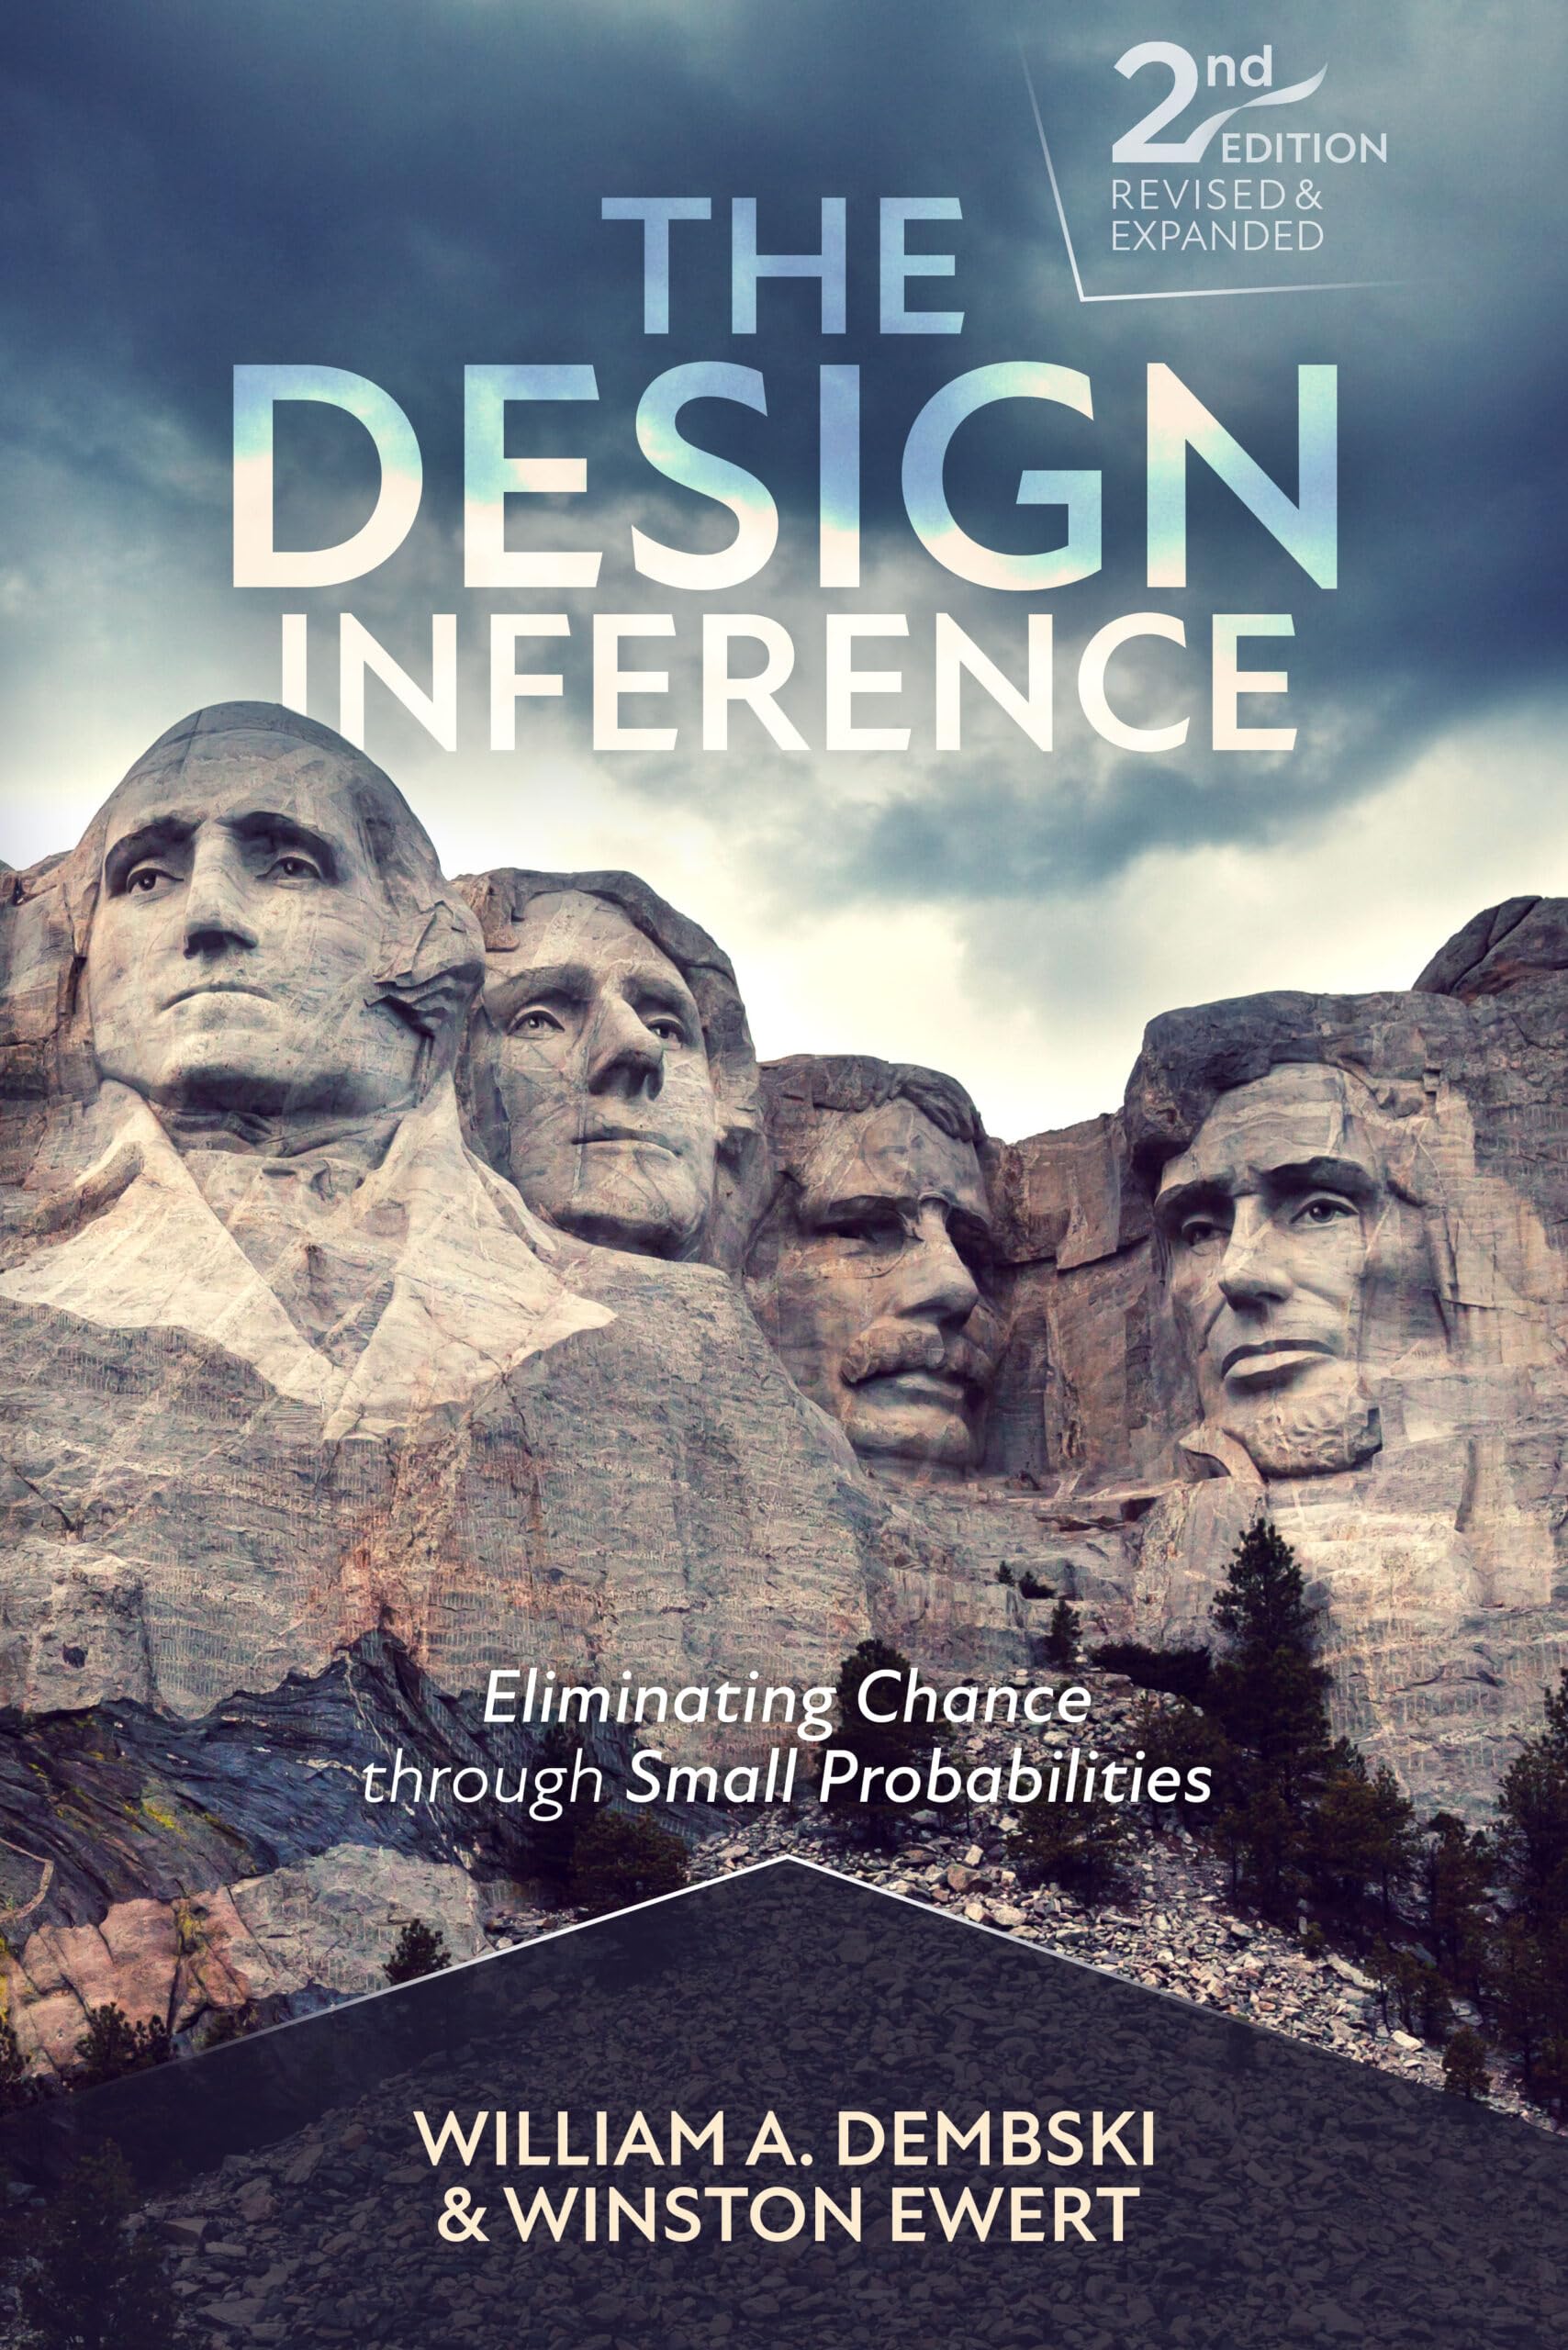 The Design Inference: Eliminating Chance through Small Probabilities